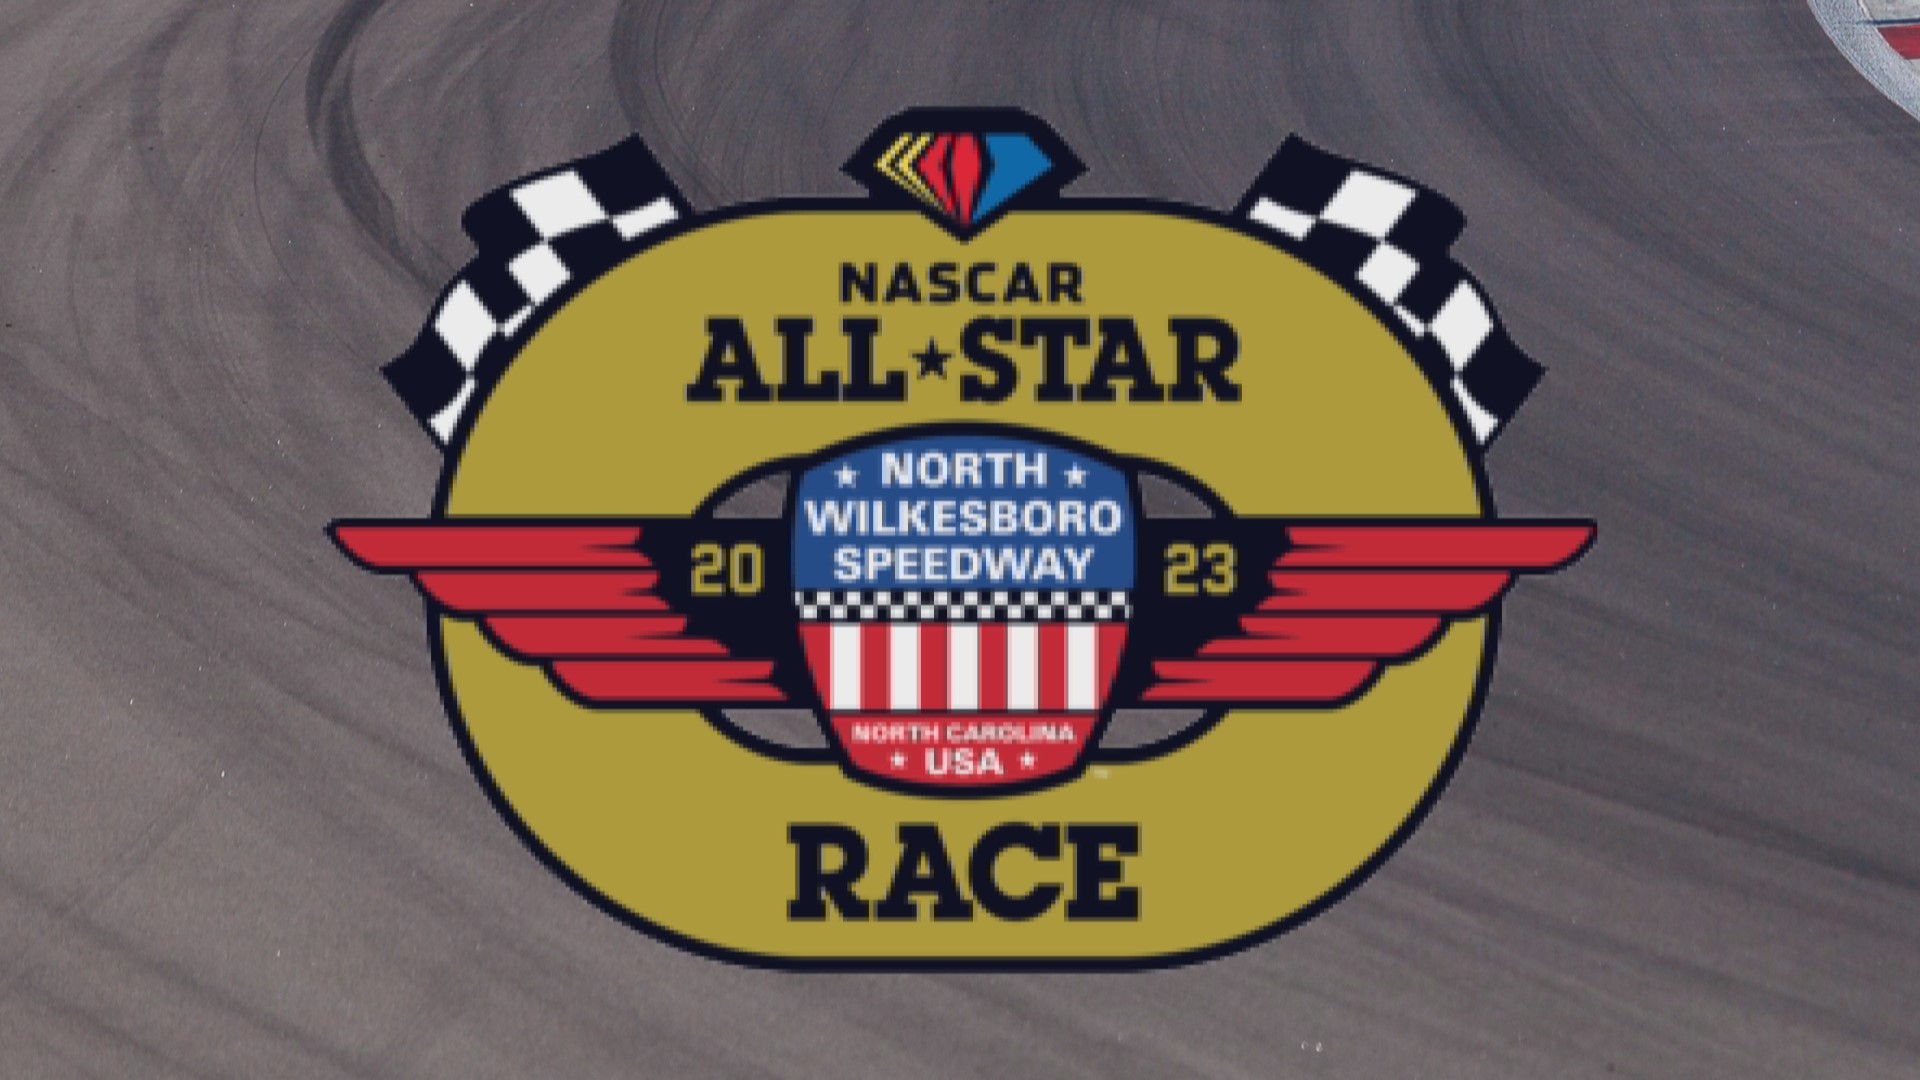 Avoid ticket scams for All Star Race in North Wilkesboro wfmynews2